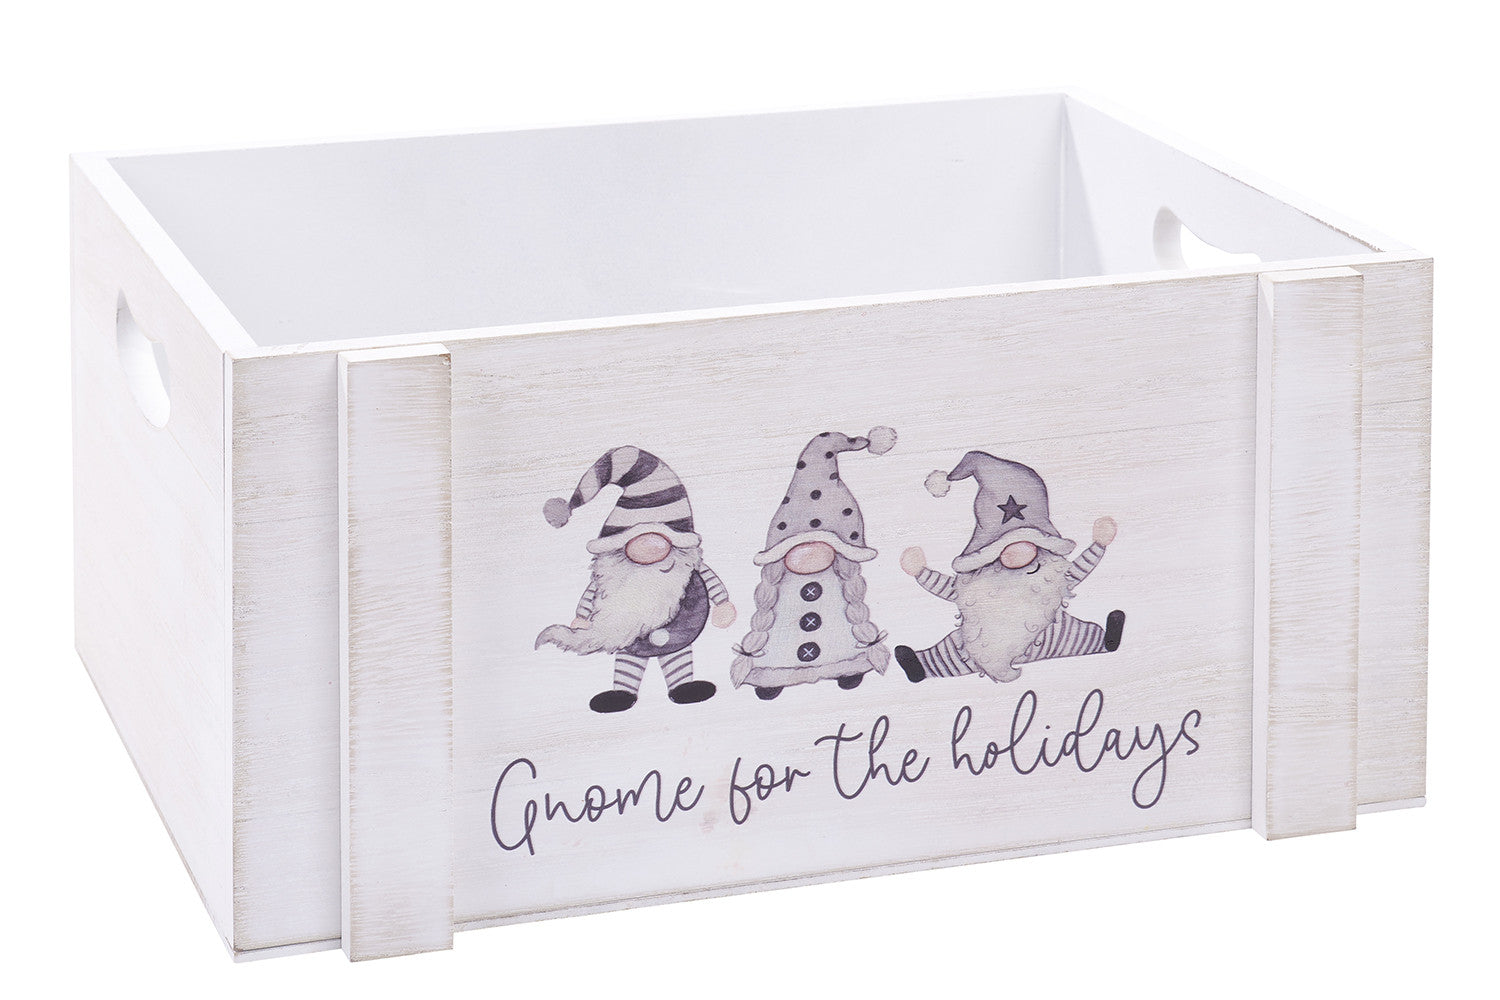 Gnome for the Holidays - Gonk Themed Wooden Decorative Crate - The Cooks Cupboard Ltd